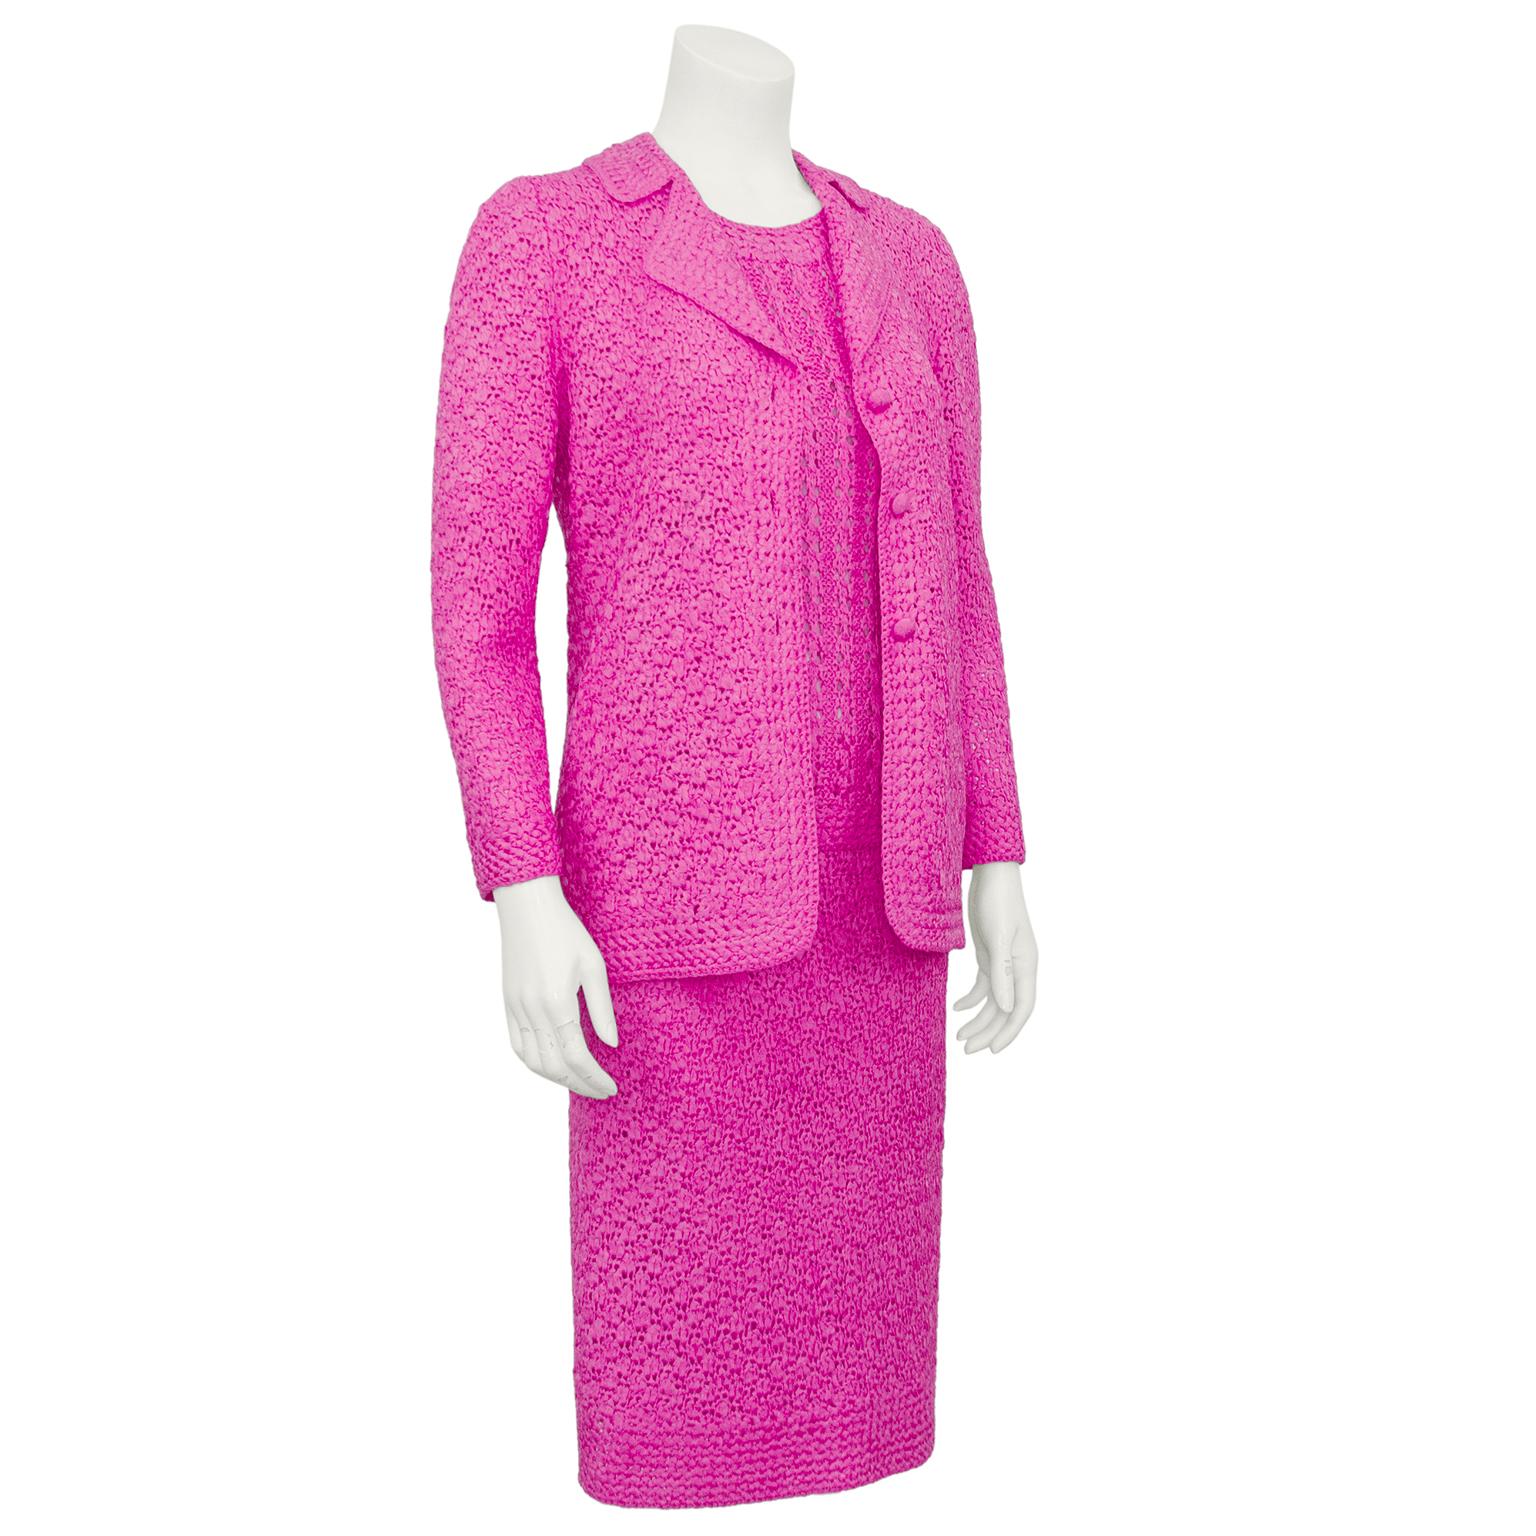 1960s Pink Crochet 3 Piece Skirt Suit In Good Condition For Sale In Toronto, Ontario